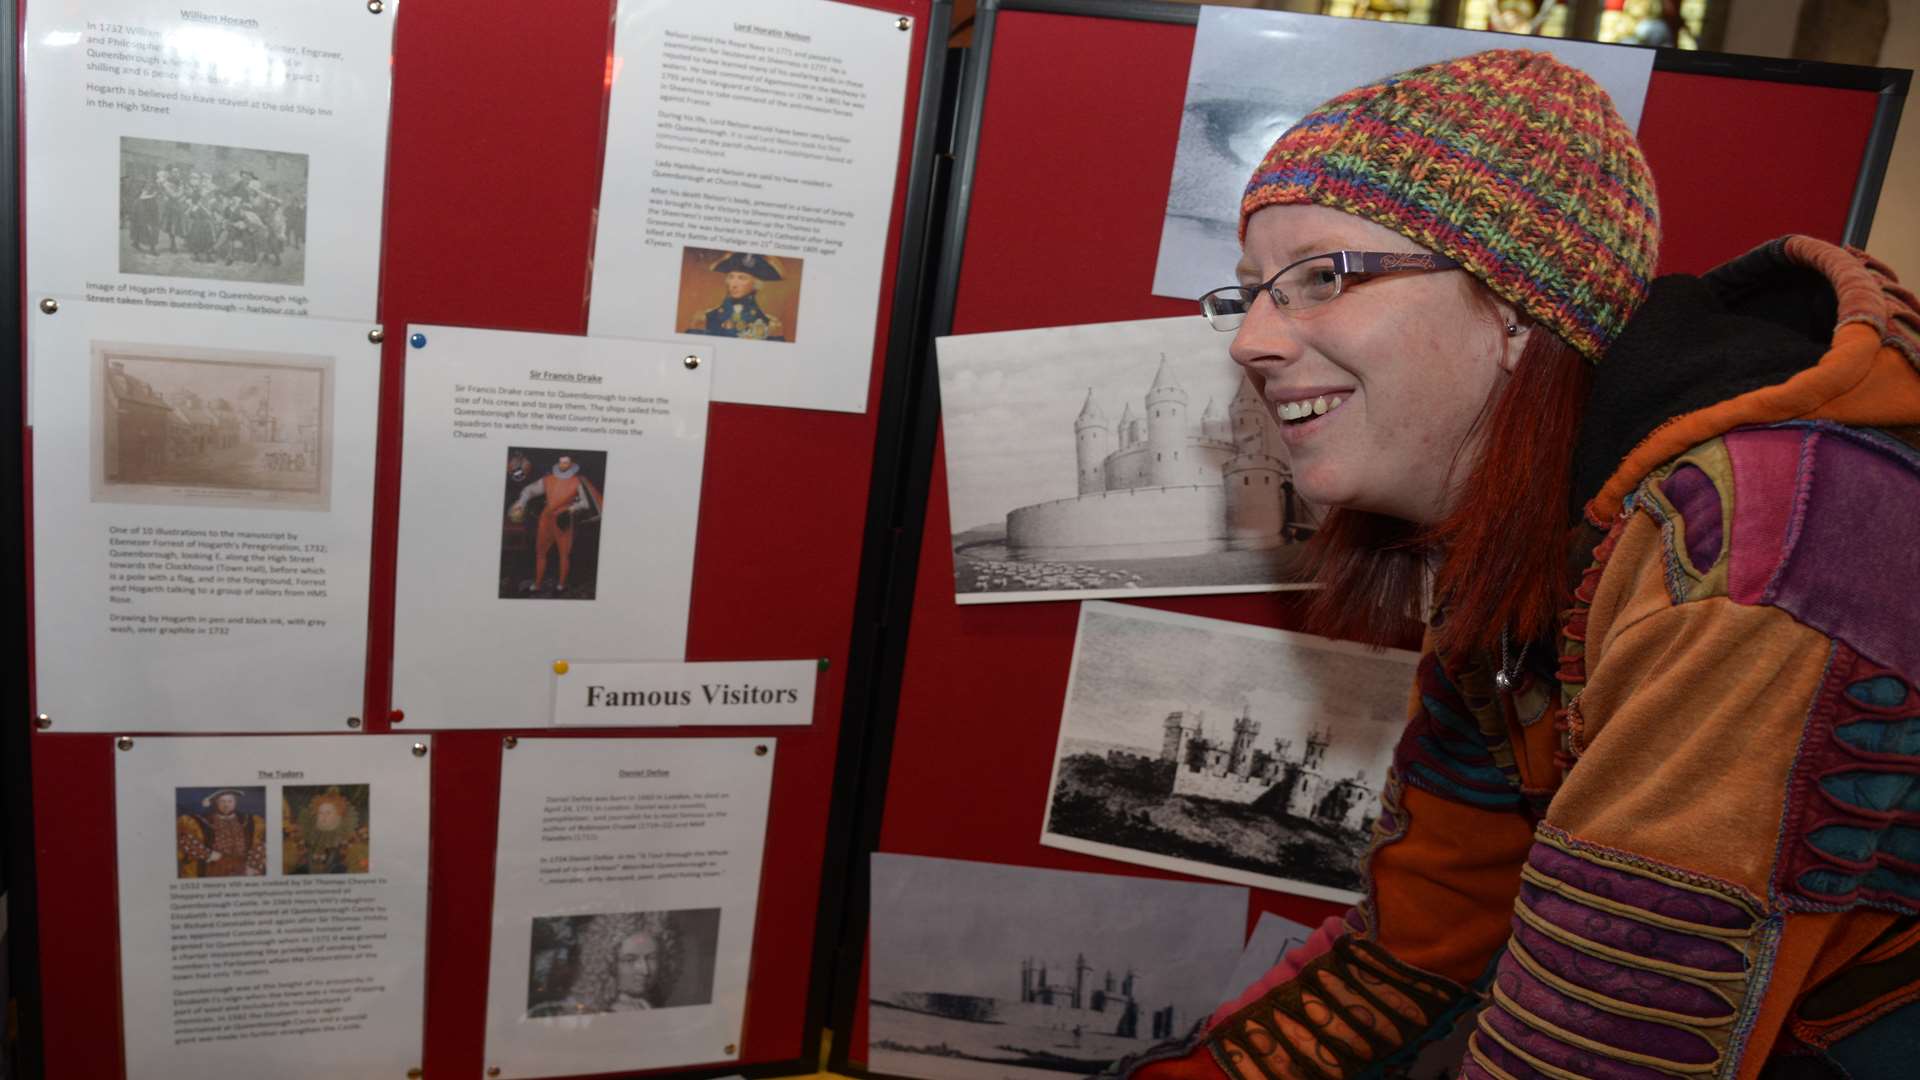 Katie Foord looks at the visitors to Queenborough display at the past, present and future exhibition